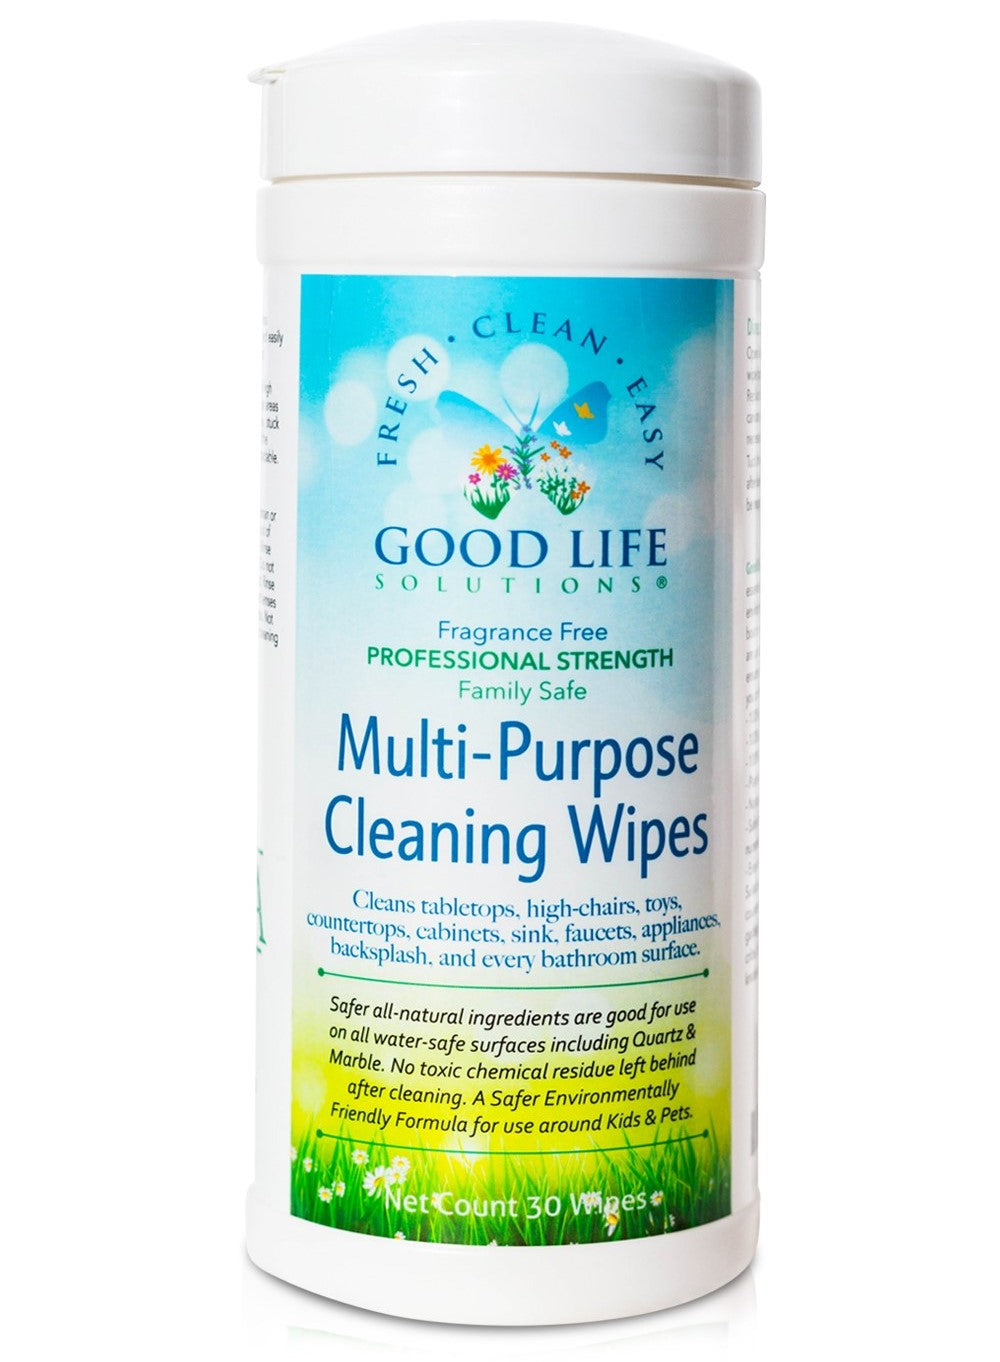 Compostable Cleaning Wipes - All Purpose Wipes - Unscented by The